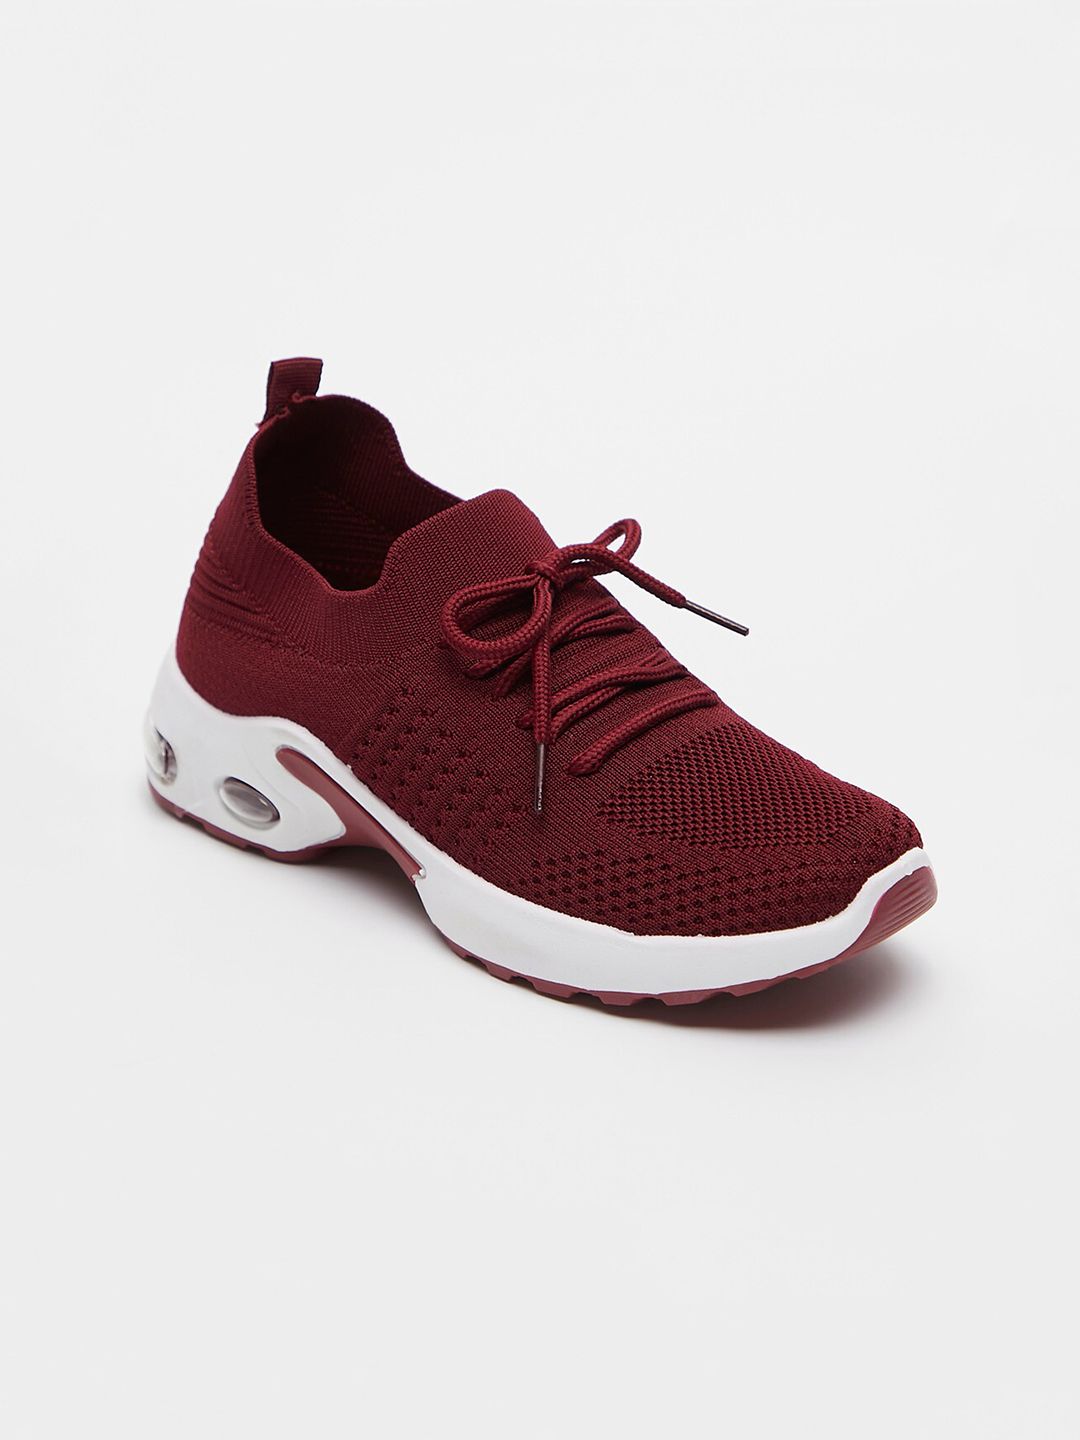 shoexpress Women Maroon Textile Training or Gym Non-Marking Shoes Price in India